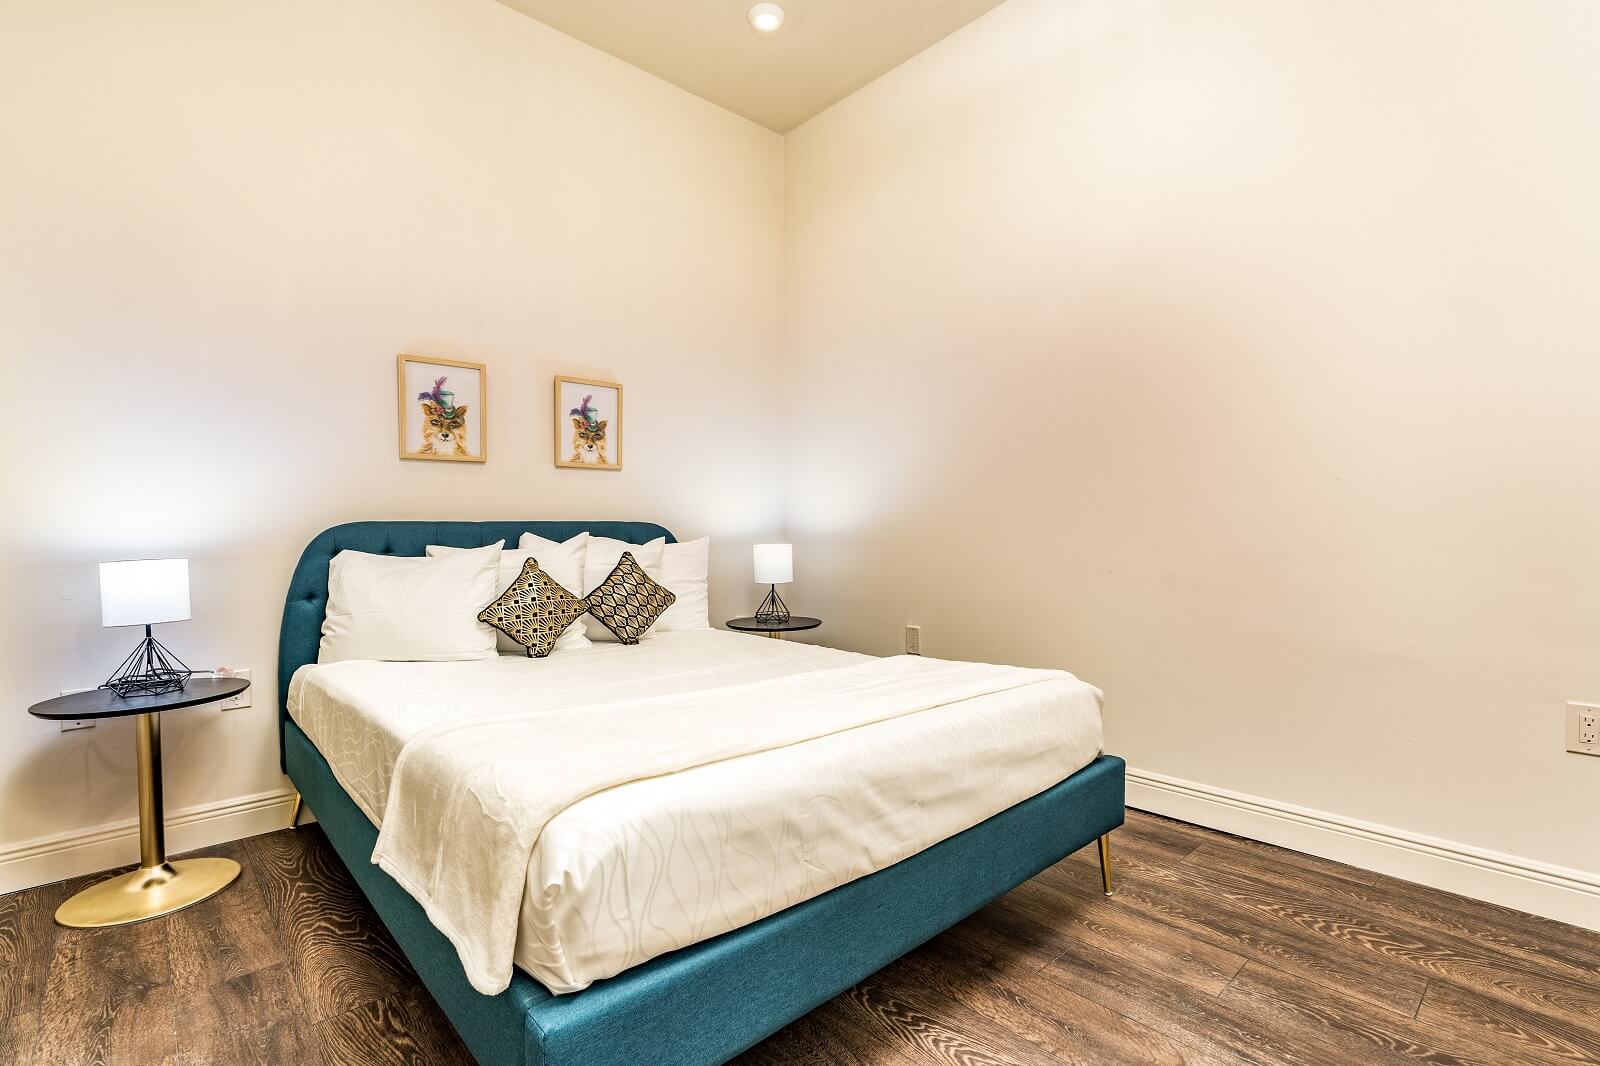 The Alexandre Unit 206 bedroom, a New Orleans luxury rental.